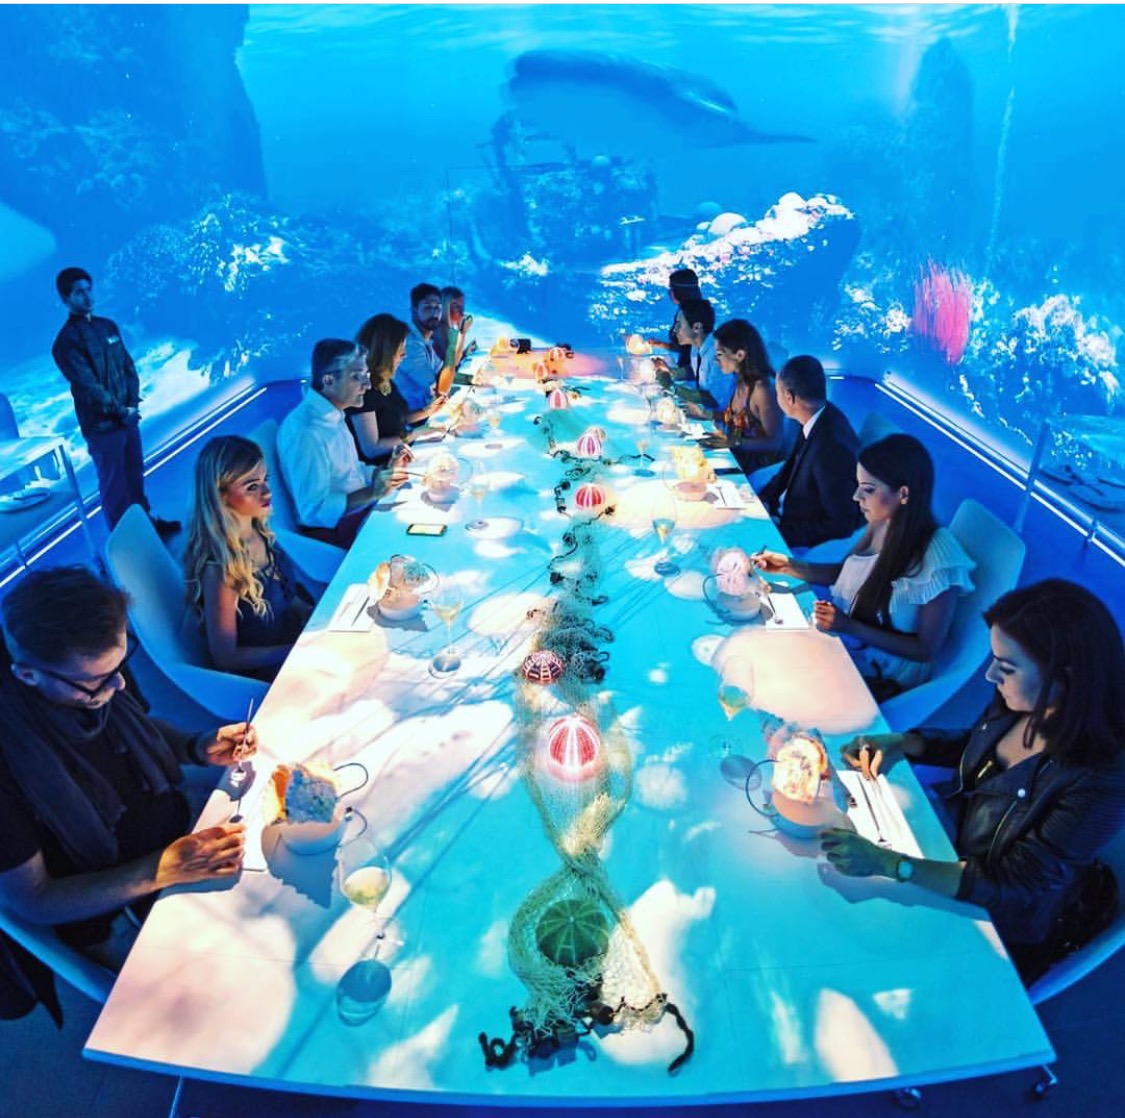 World’s most expensive restaurant